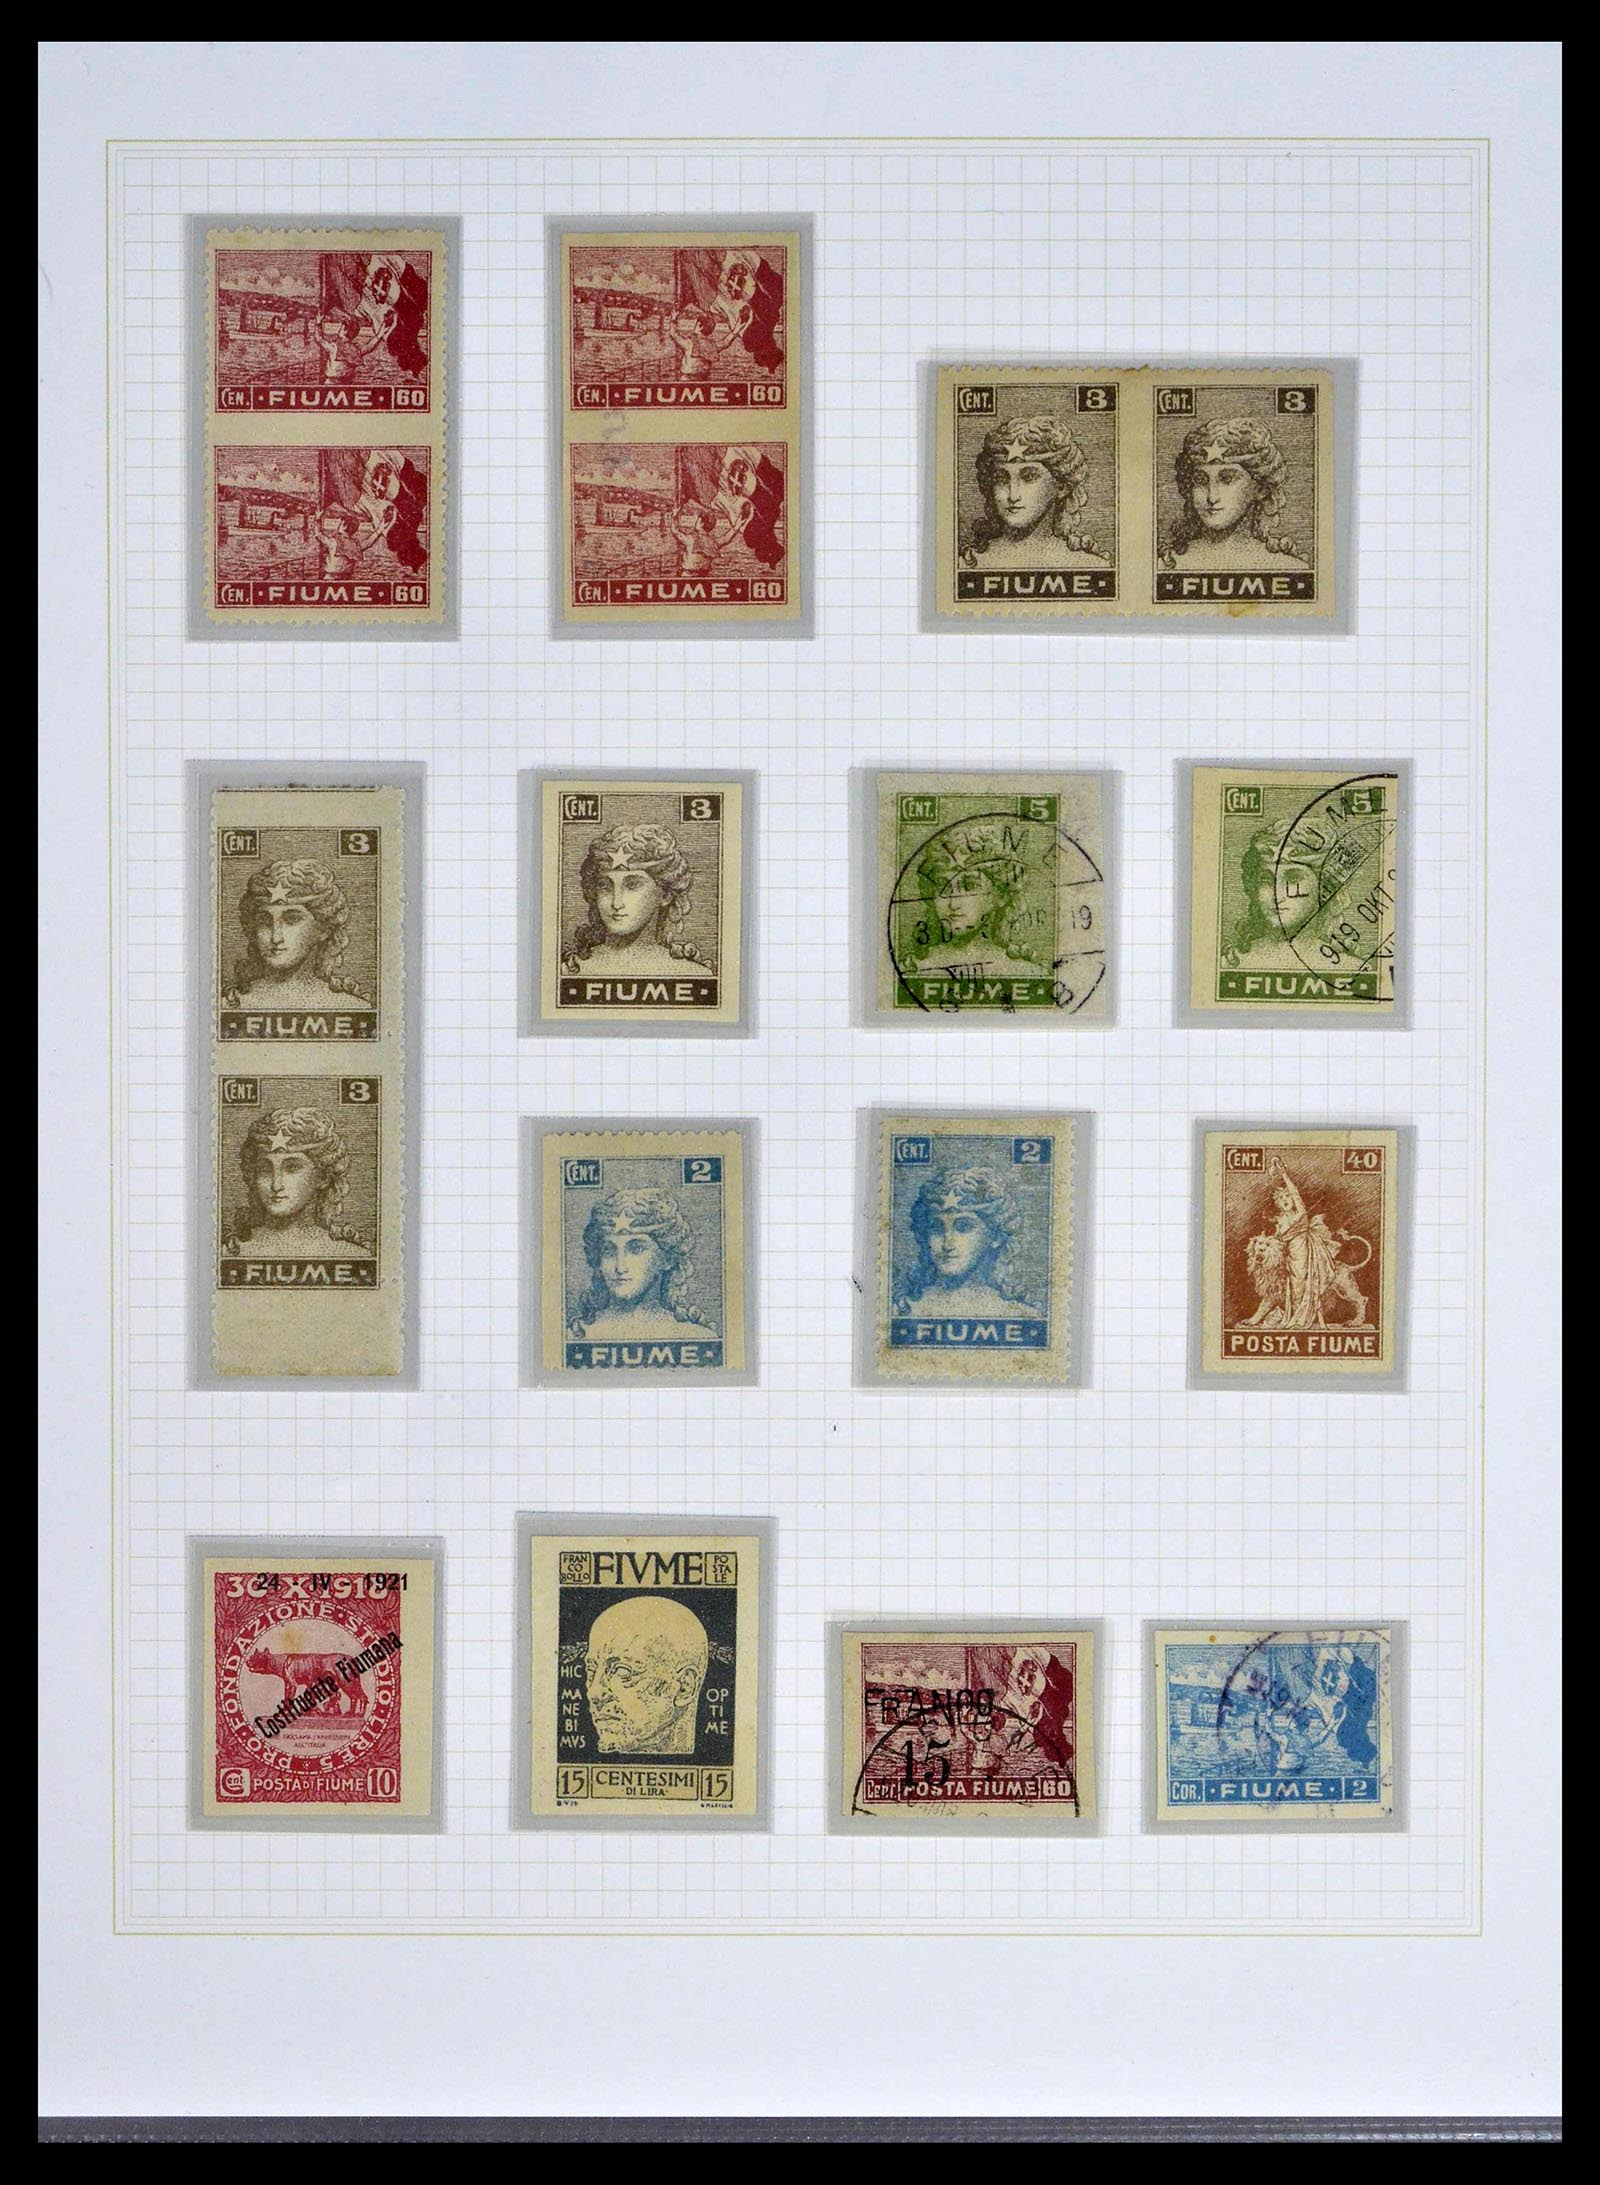 39100 0057 - Stamp collection 39100 Fiume exhibition collection 1850-1945.